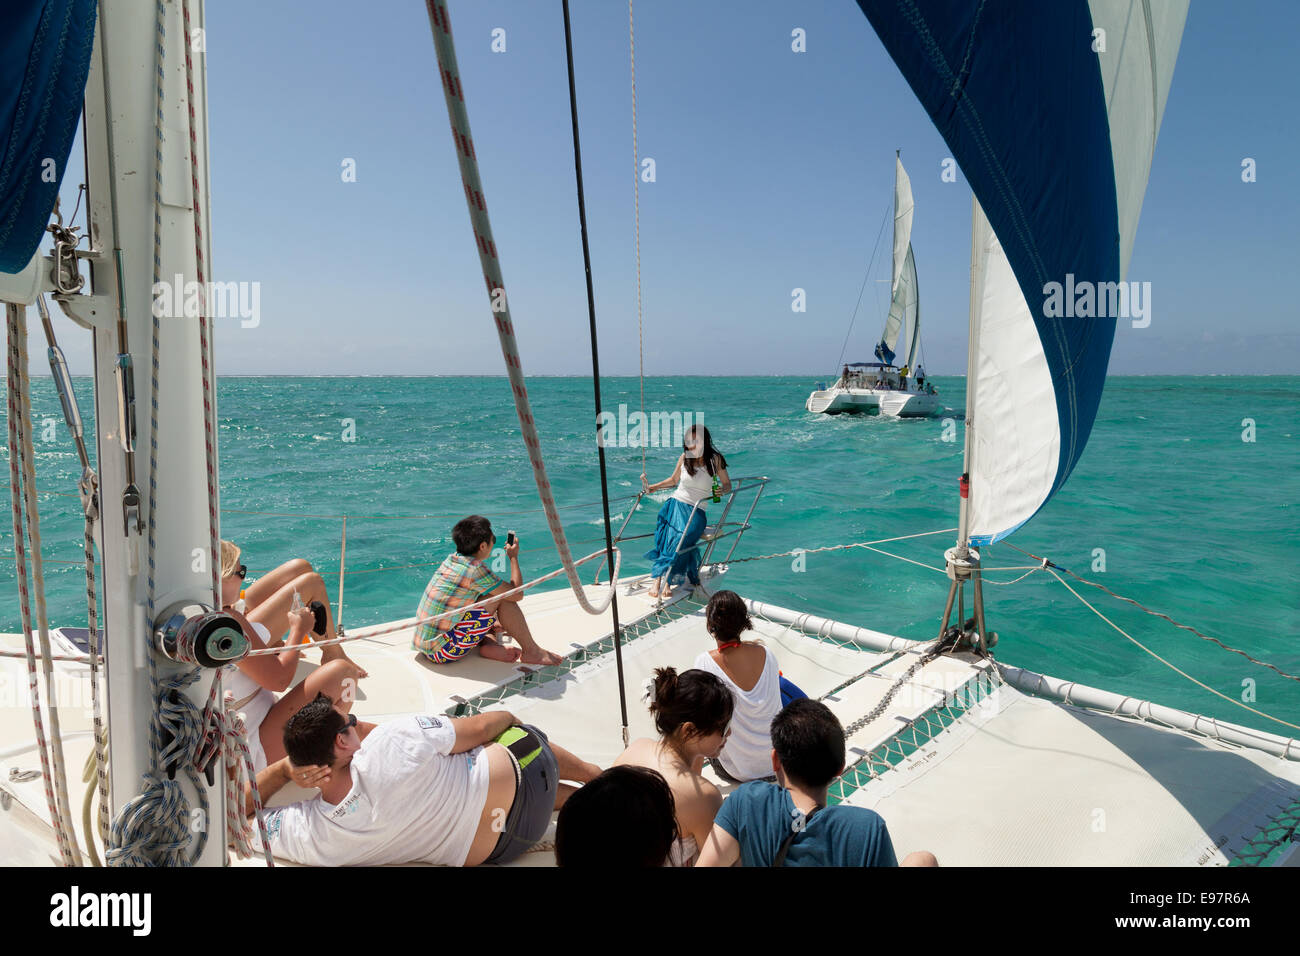 People sailing in the Indian Ocean off the coast of Mauritius Stock Photo